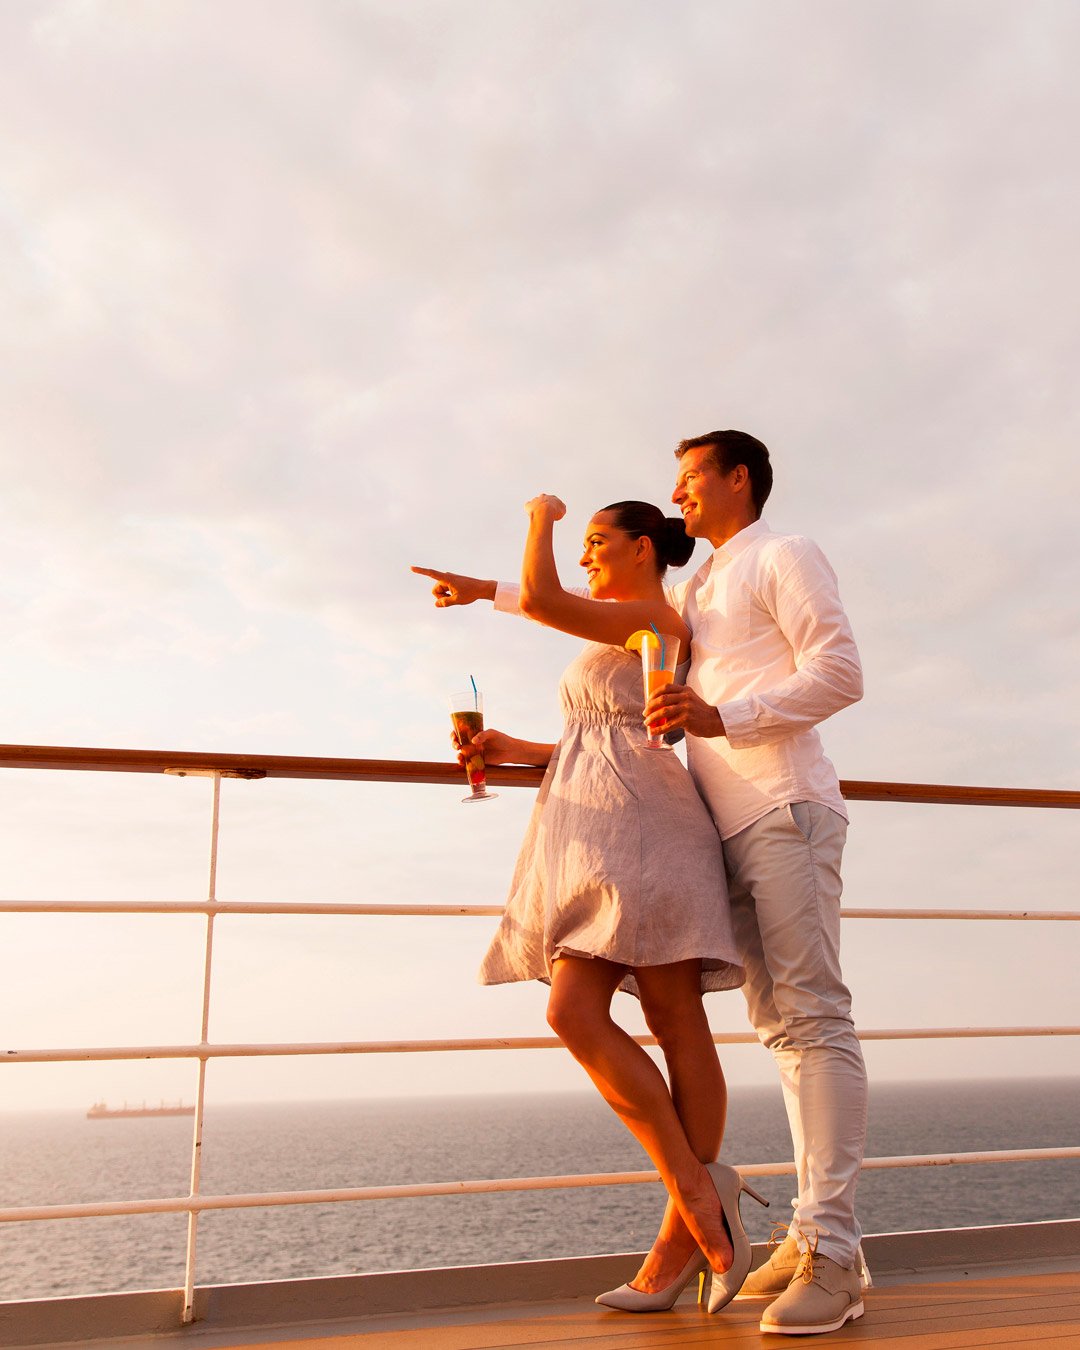 engagement party ideas sunset boat trip